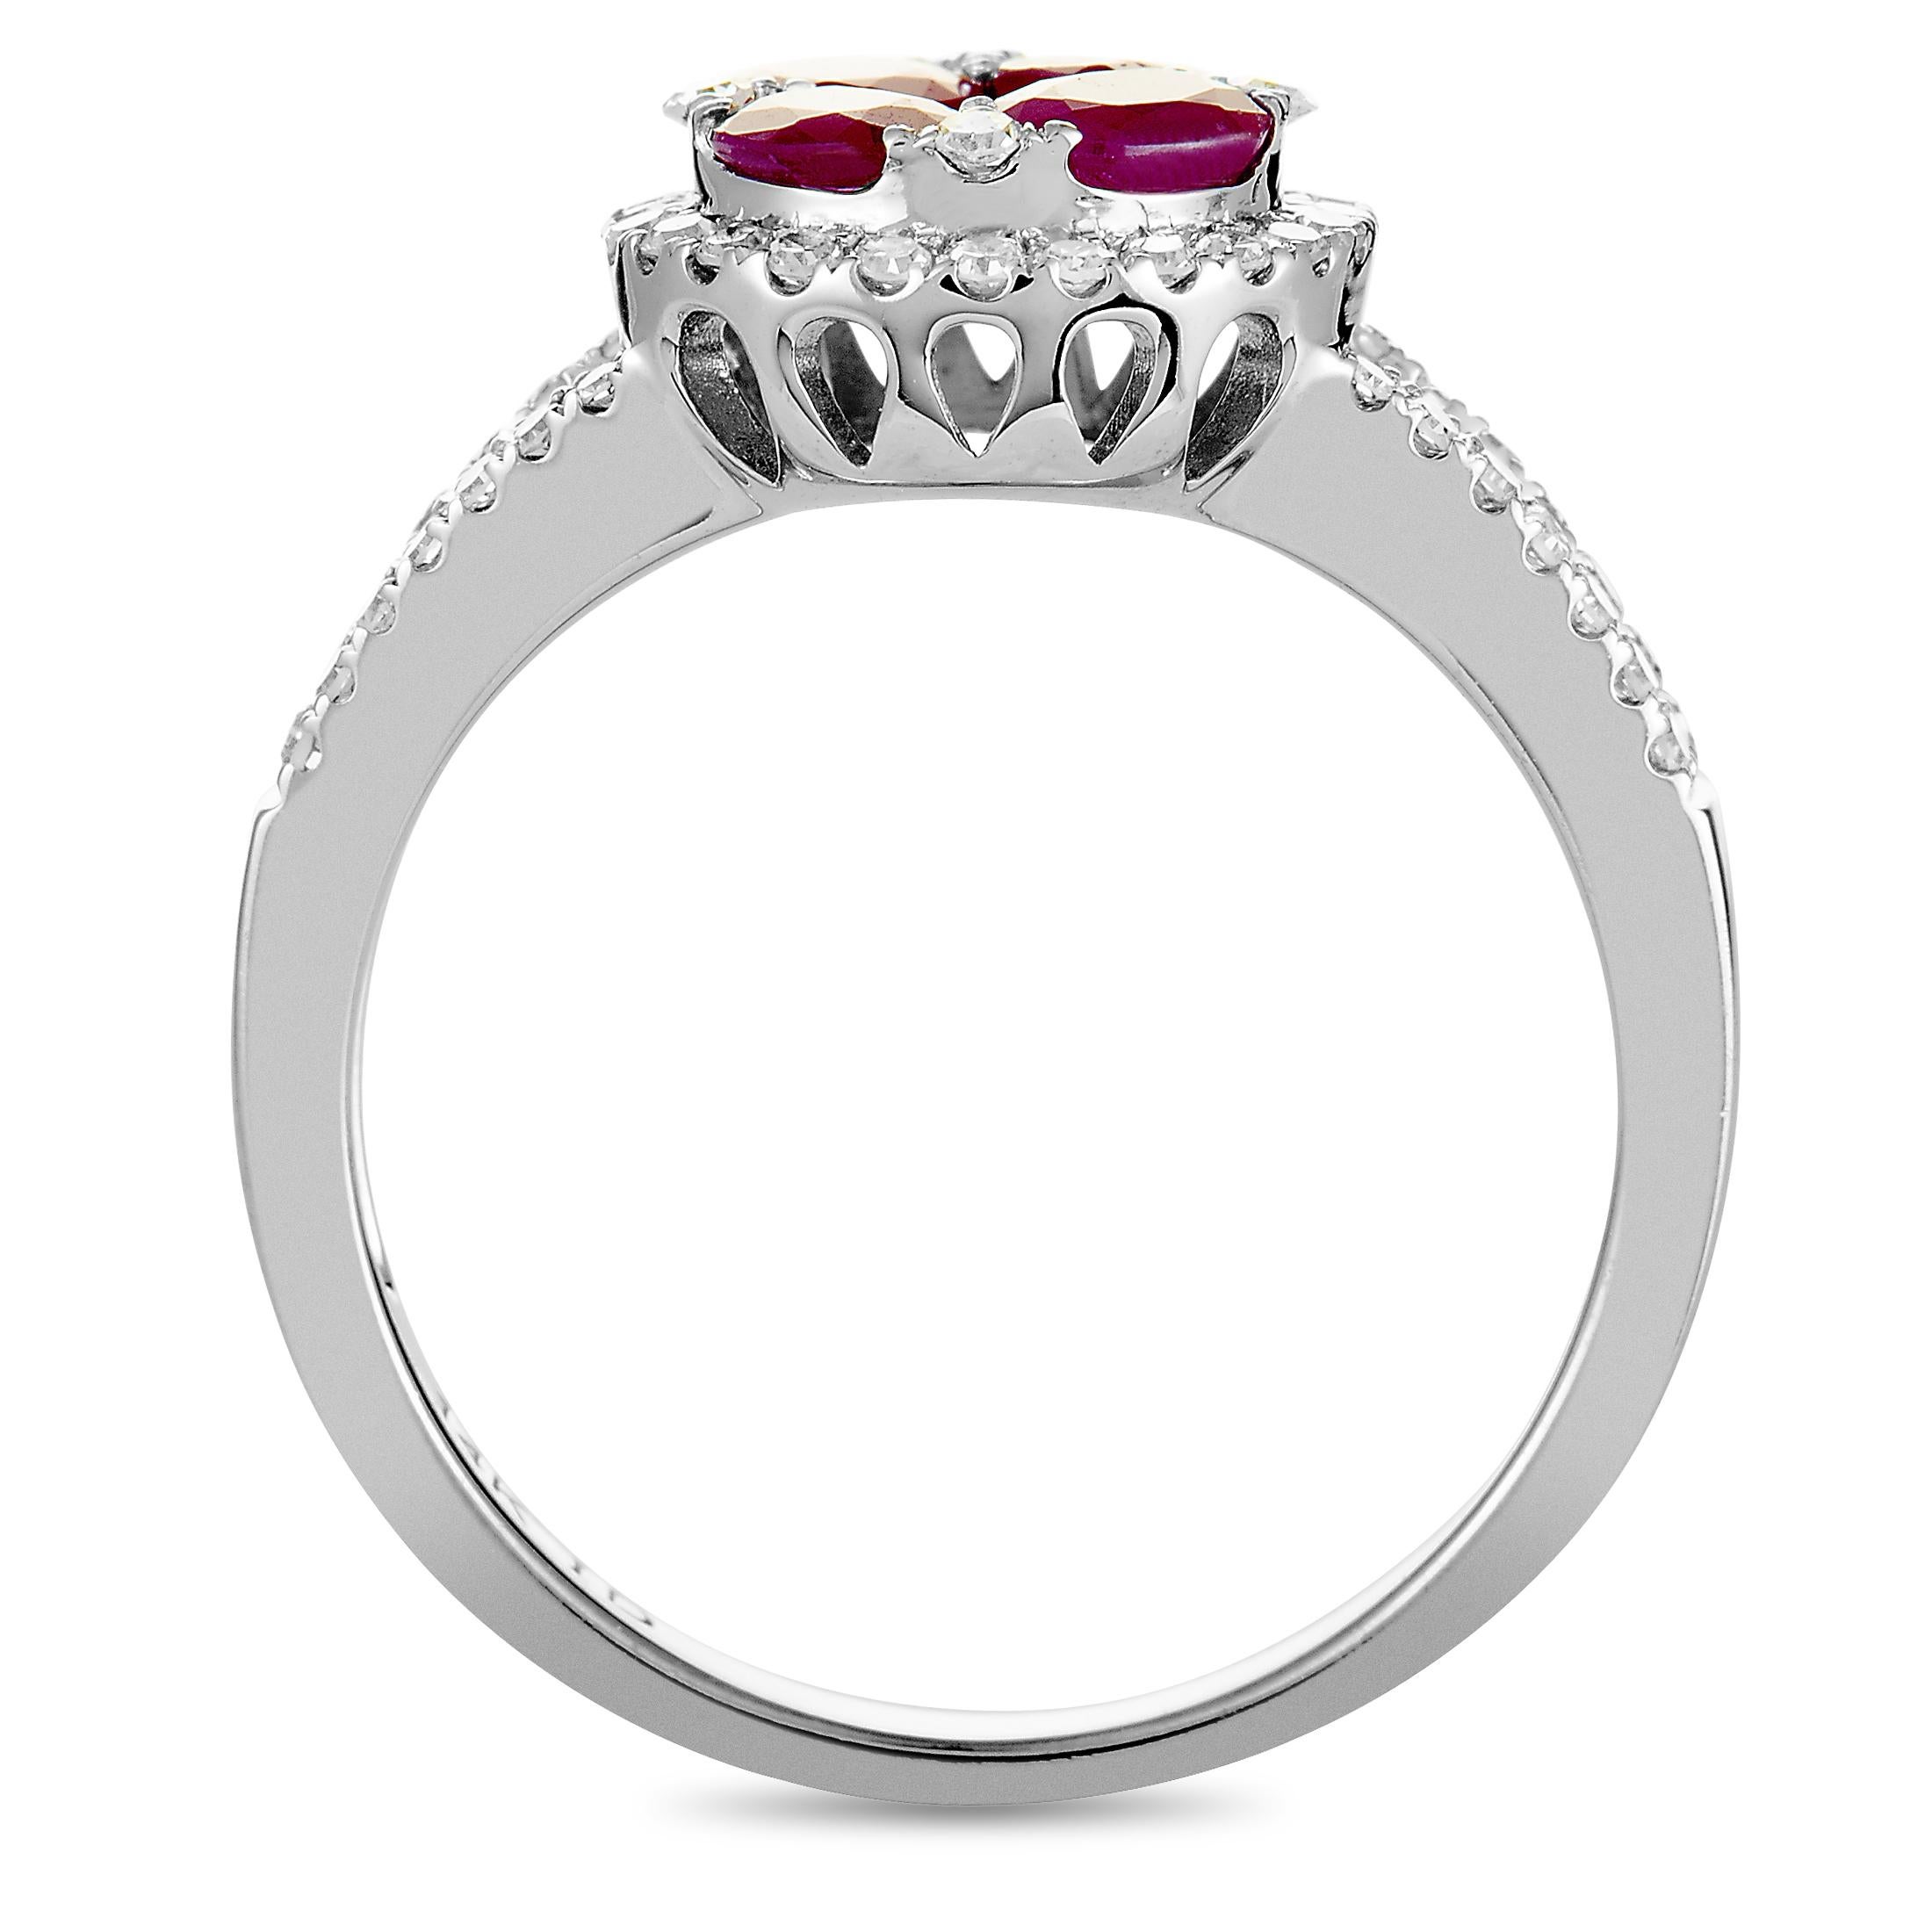 This ring is crafted from 14K white gold and set with rubies and with diamonds that amount to 0.33 carats. The ring weighs 3.9 grams, boasting band thickness of 2 mm and top height of 6 mm, while top dimensions measure 20 by 10 mm.
 
 Offered in